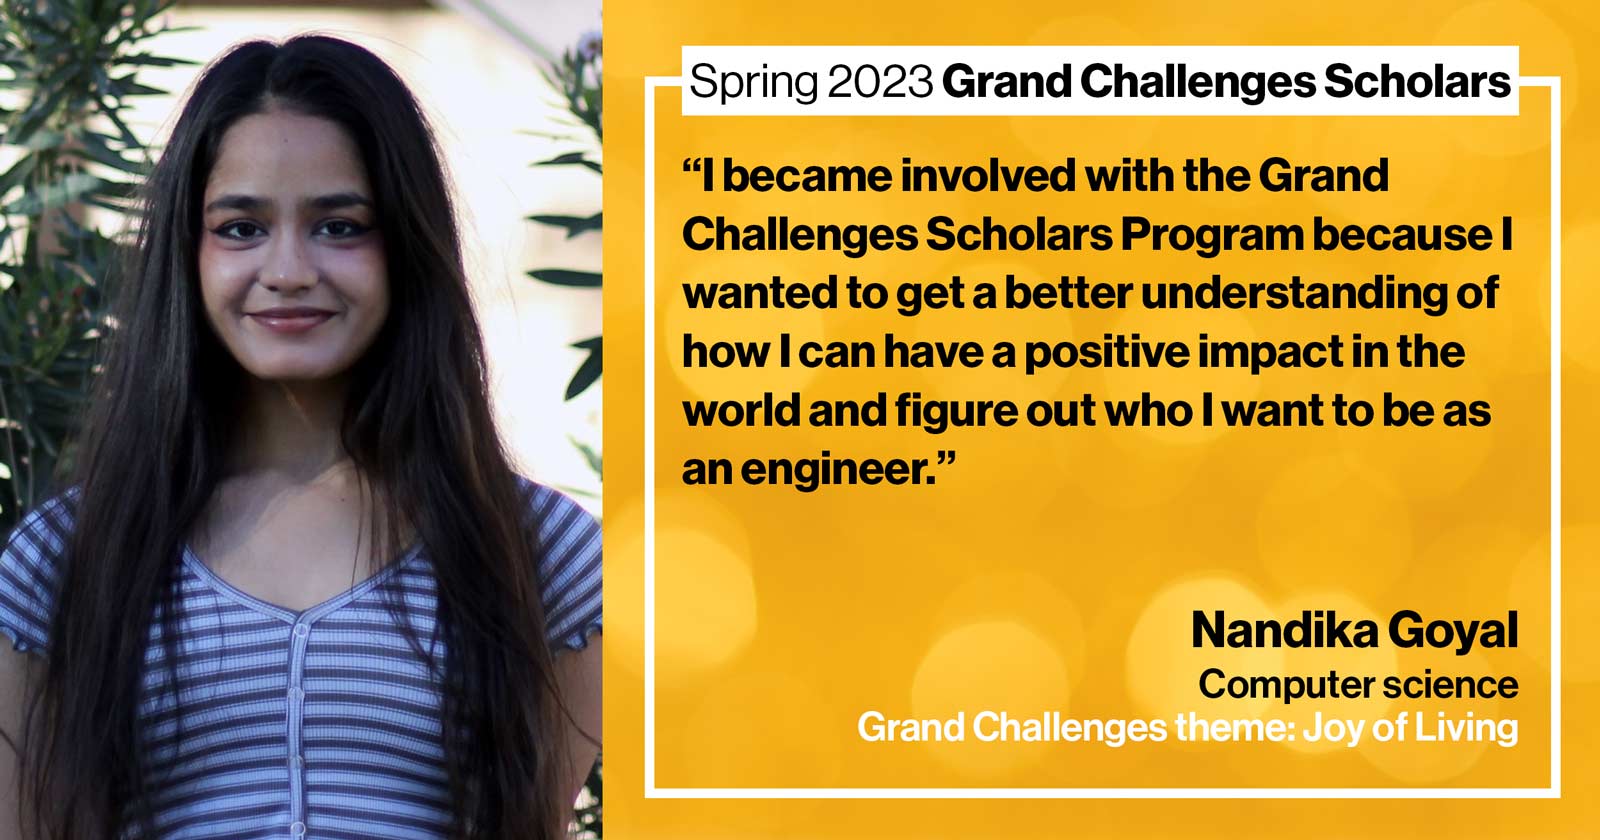 "Nandika Goyal Computer science Grand Challenge: Joy of Living Quote: “I became involved with the Grand Challenges Scholars Program because I wanted to get a better understanding of how I can have a positive impact in the world and figure out who I want to be as an engineer.”"